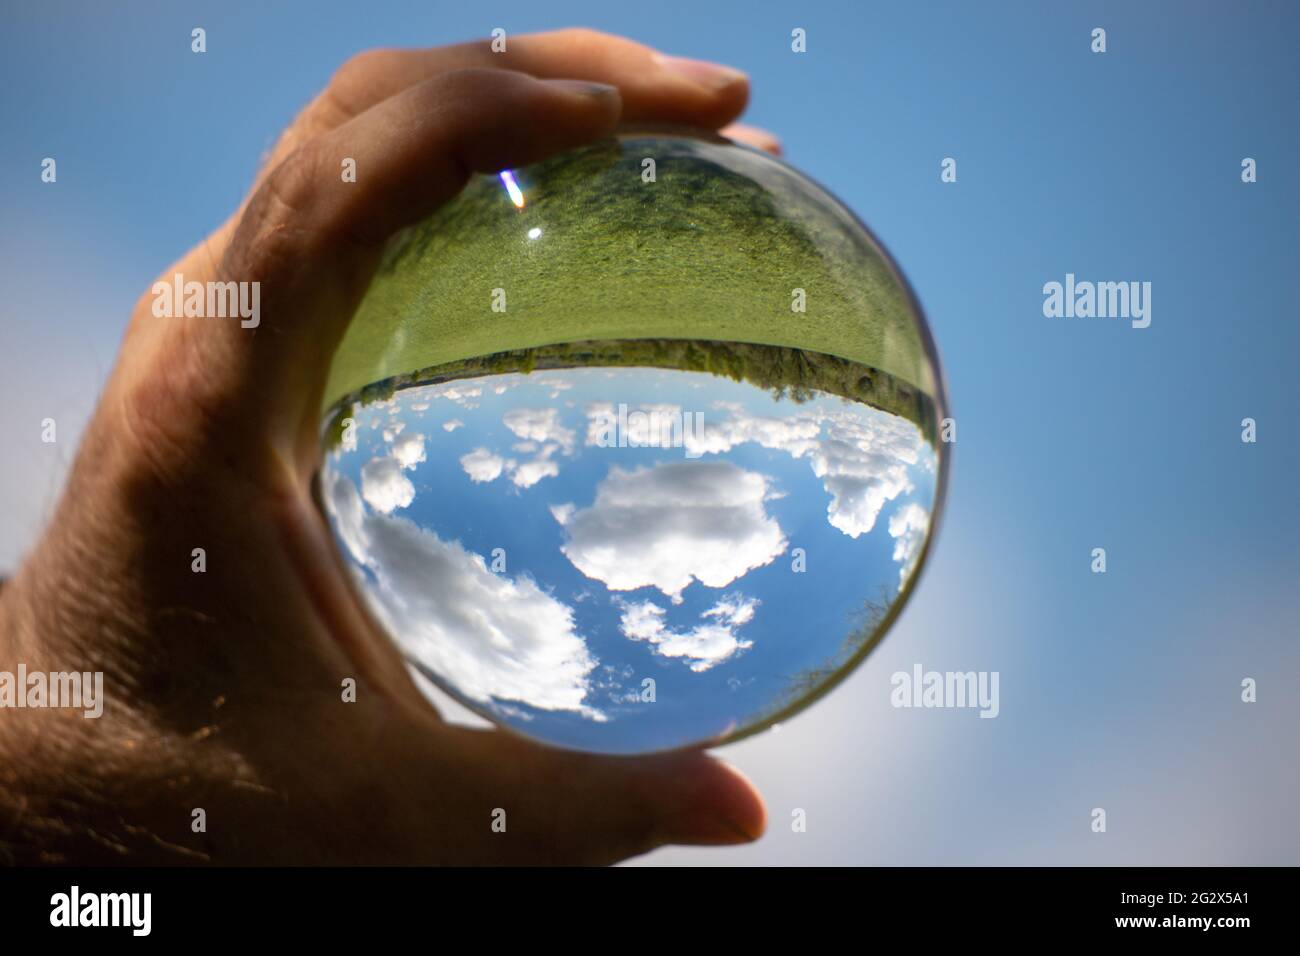 Landscape with green meadow and blue sky in a glass sphere held in the hand with defocused background Stock Photo